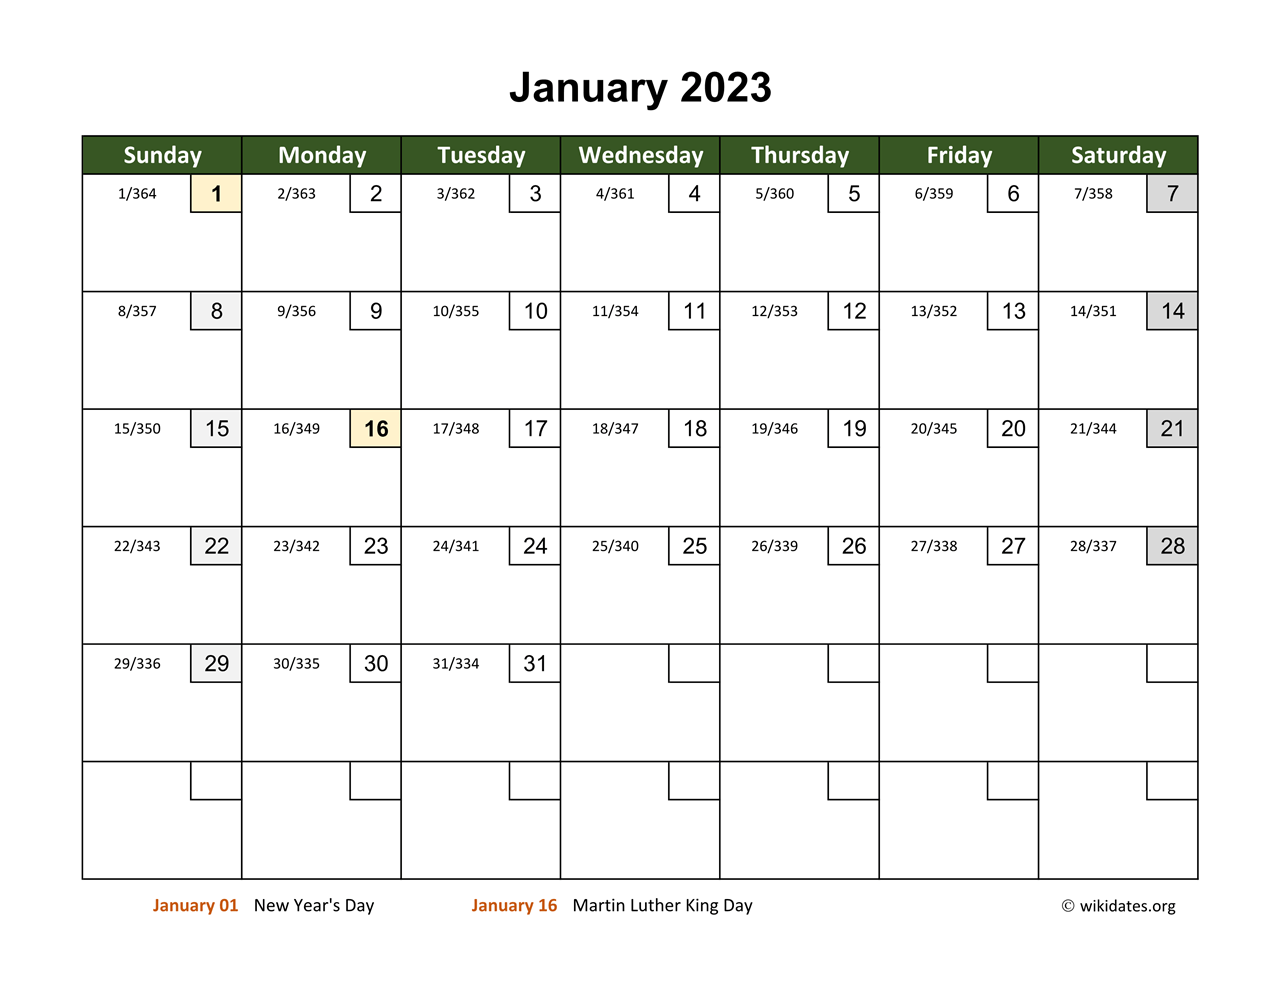 January 2023 Calendar With Day Numbers WikiDates